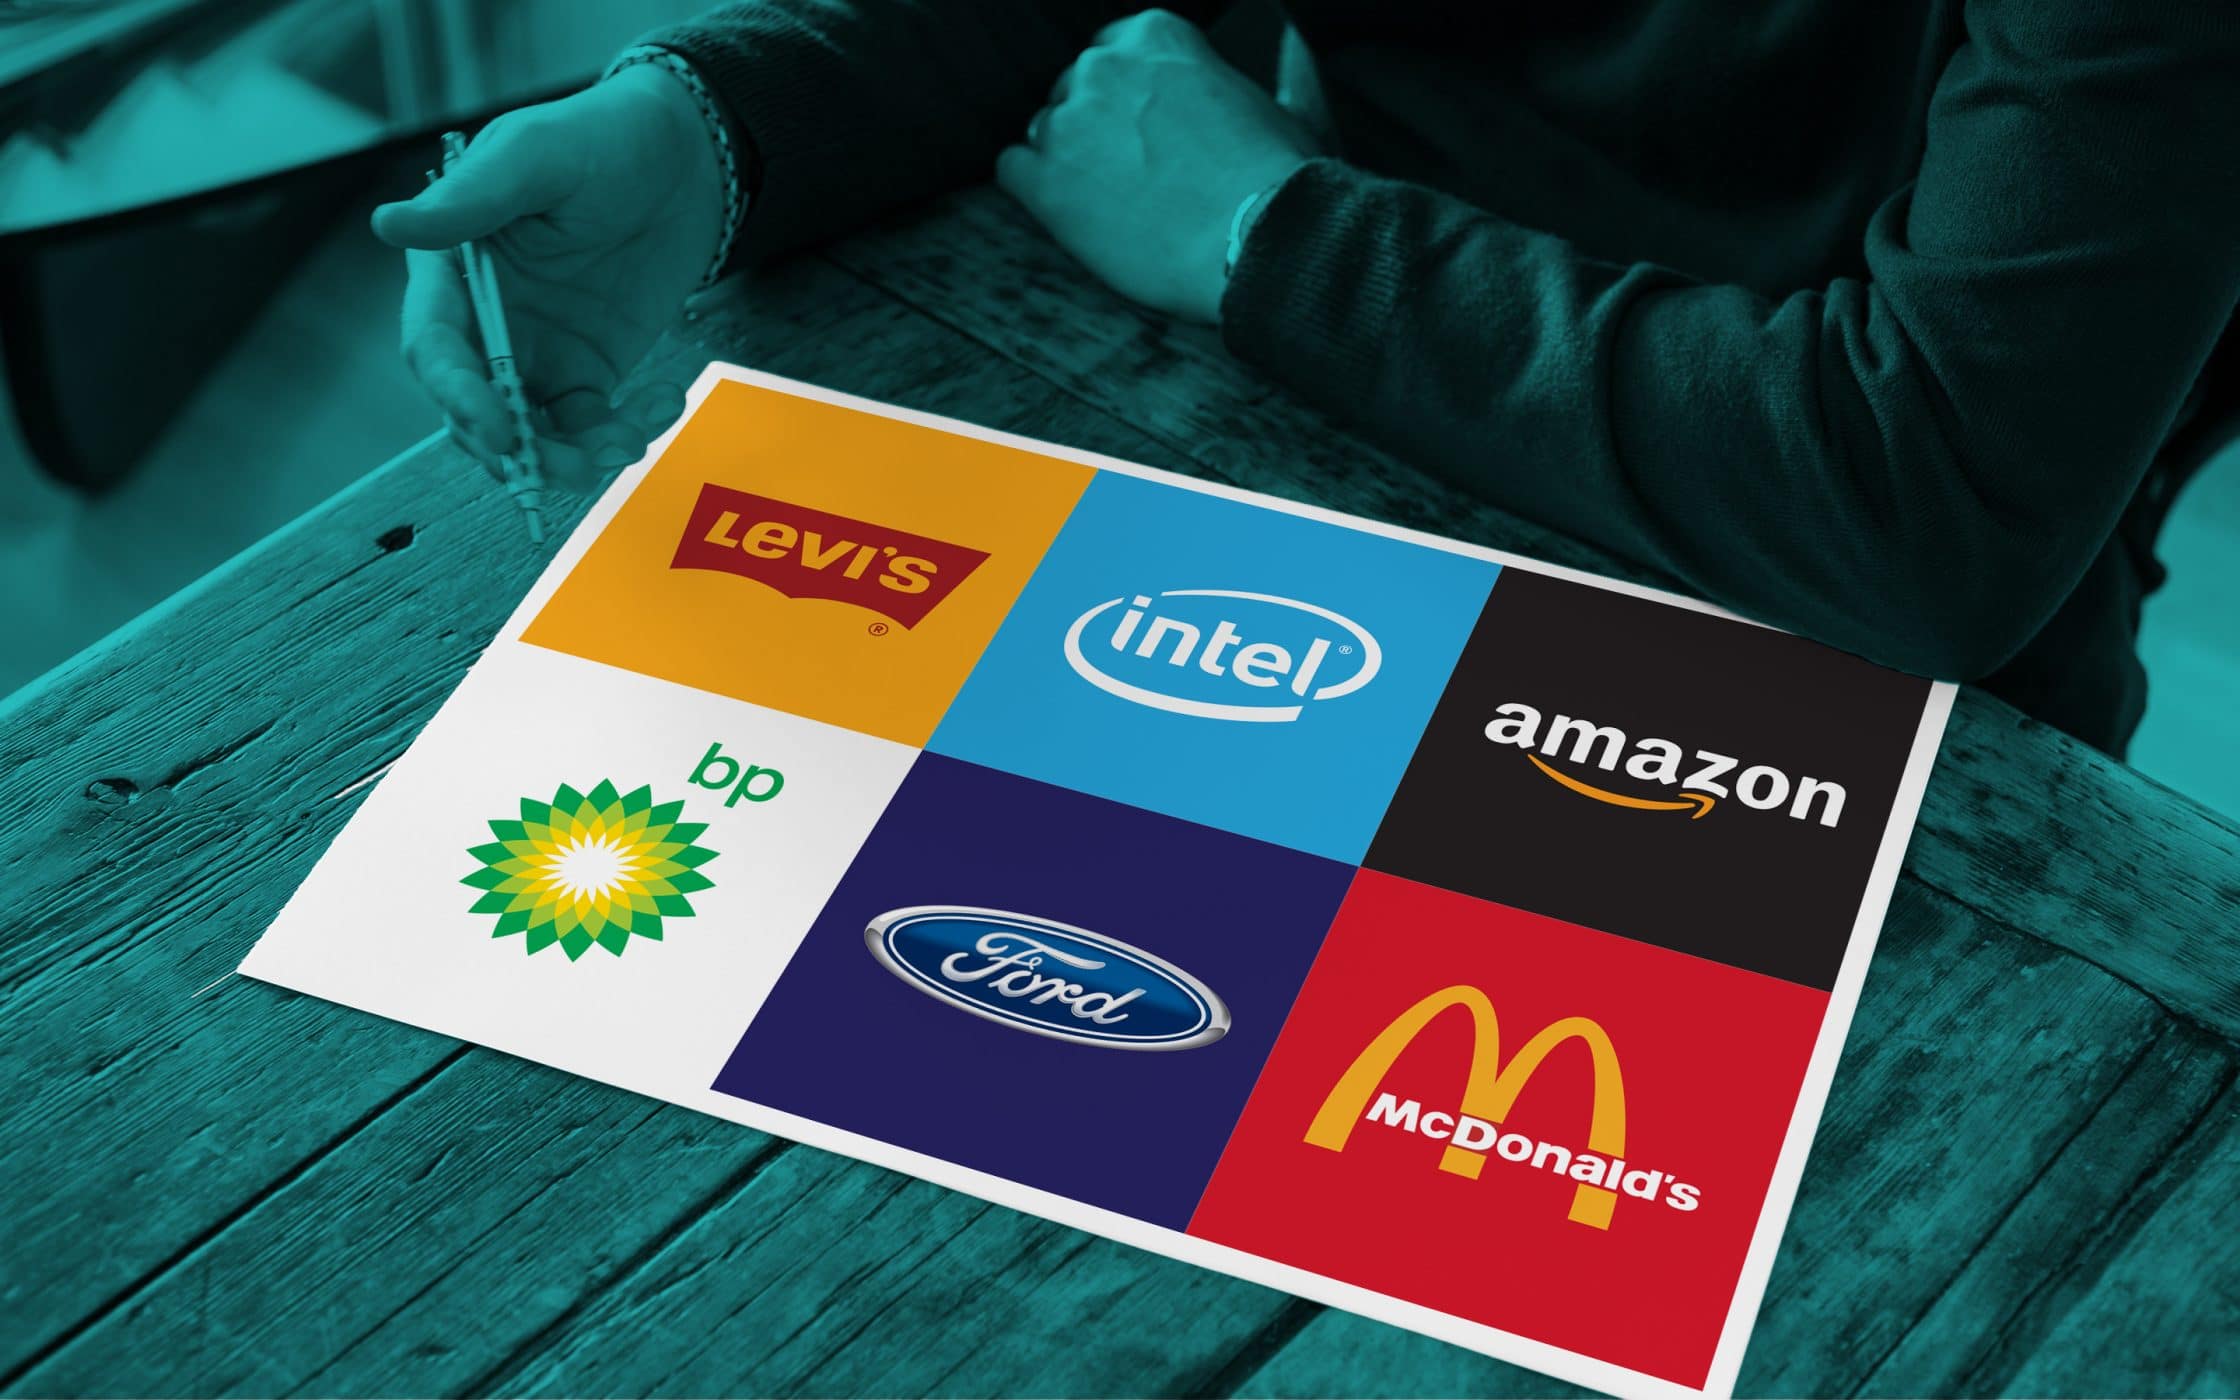 Intel Company Logo - What Makes A Good Logo? Famous Company Logos To Inspire Your Own